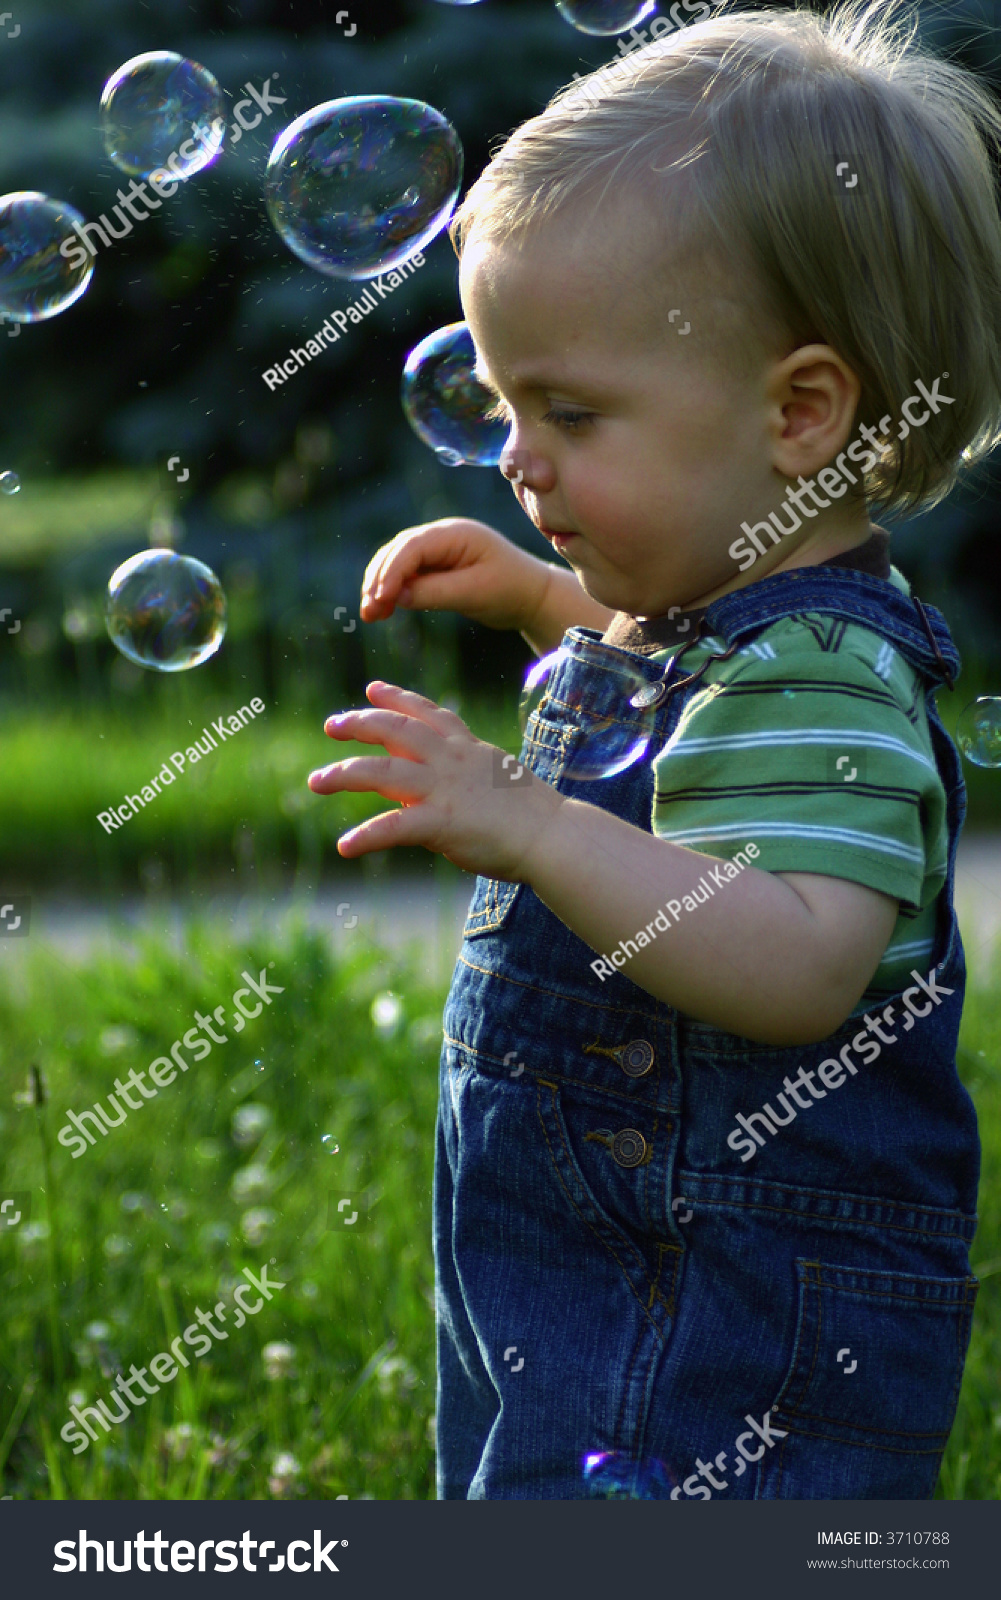 Baby, One Year Old Playing With Bubbles, Profile Stock ...